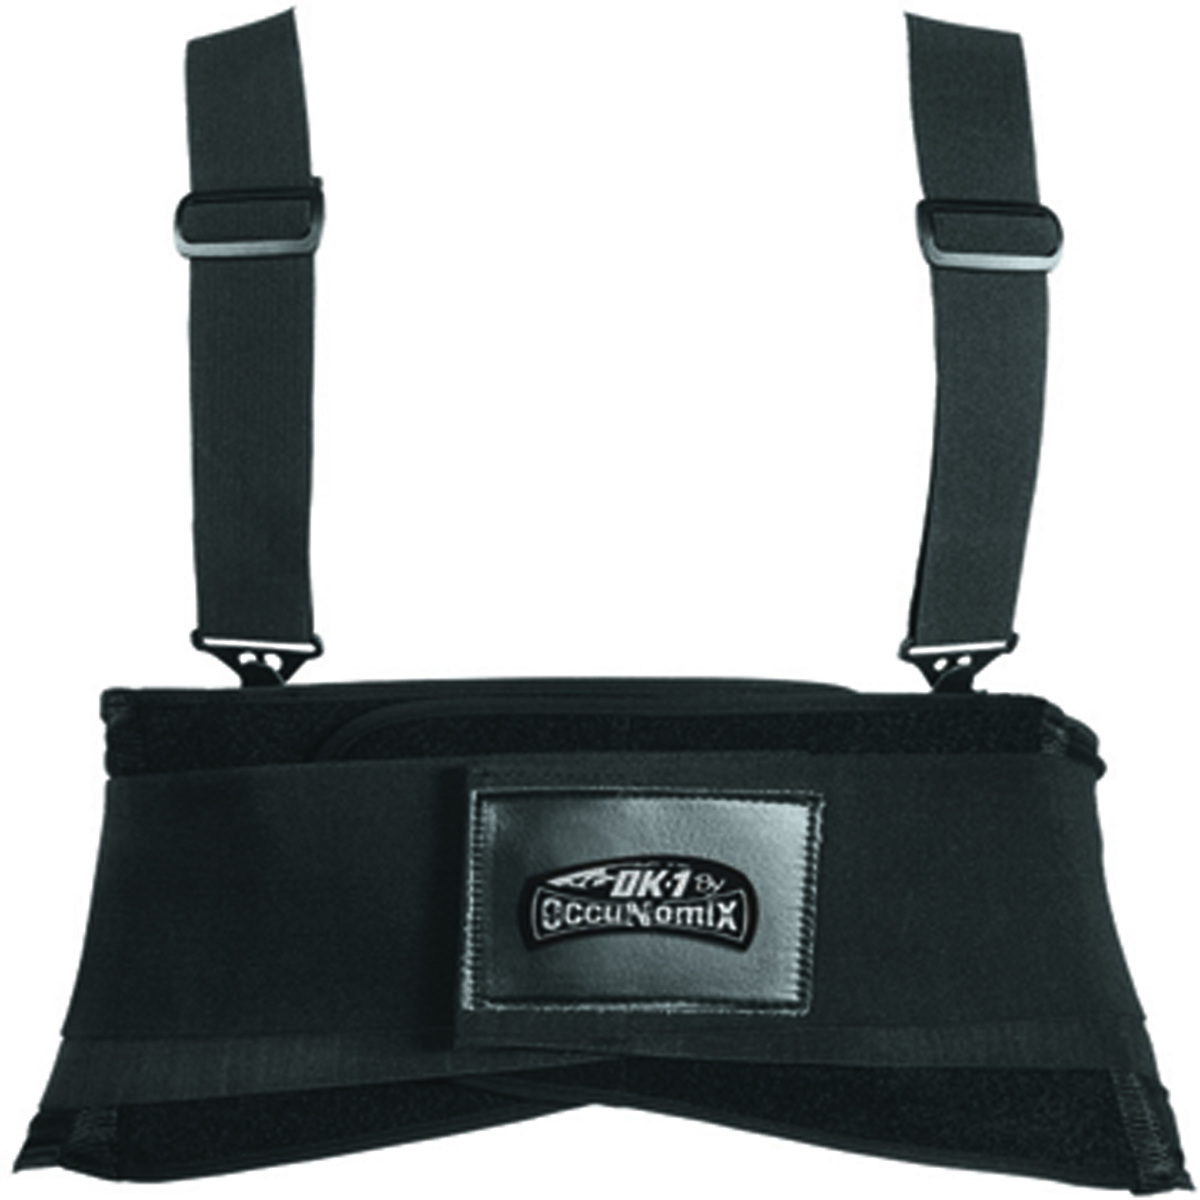 OccuNomix X-Large Black OK-1 Polyester/Rubber Back Support